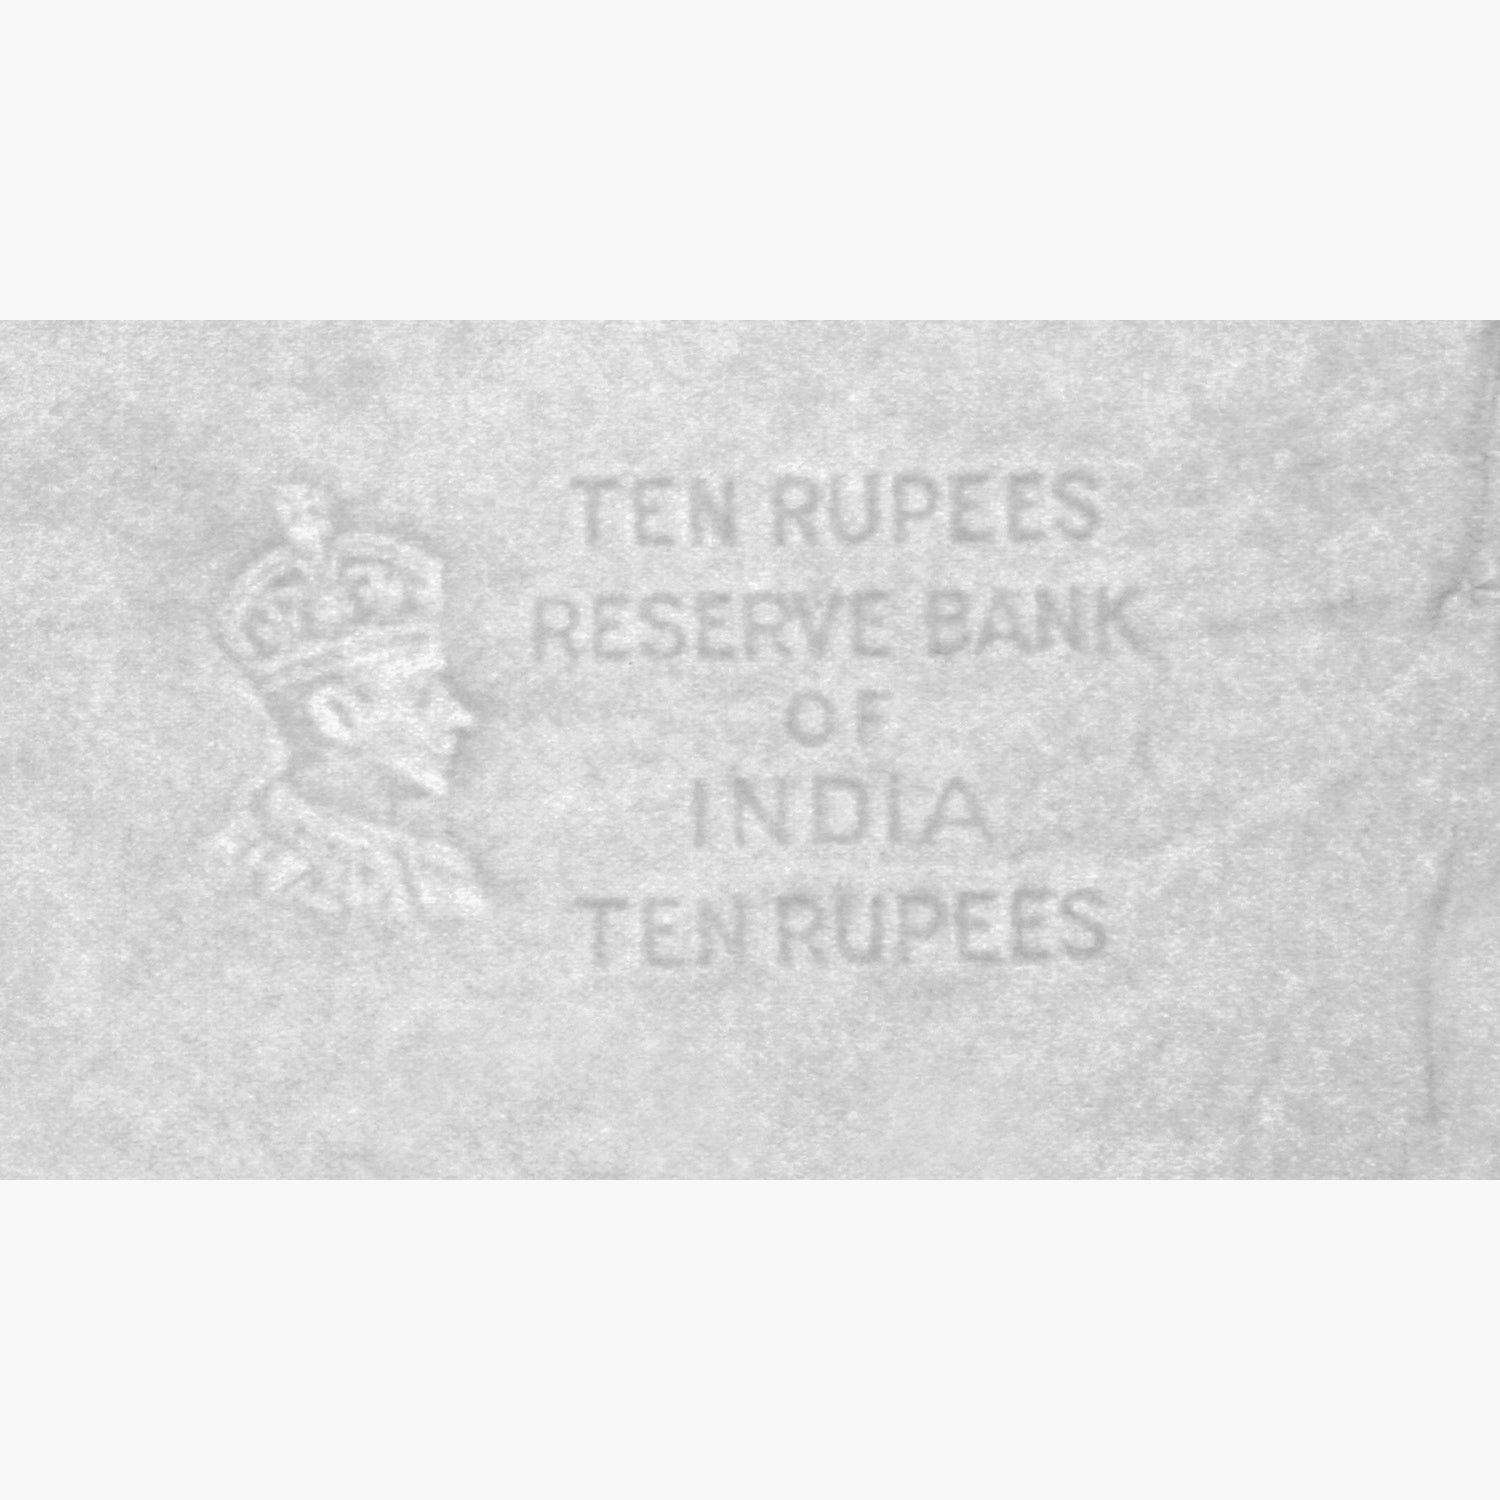 10 Rupees Wreck banknote